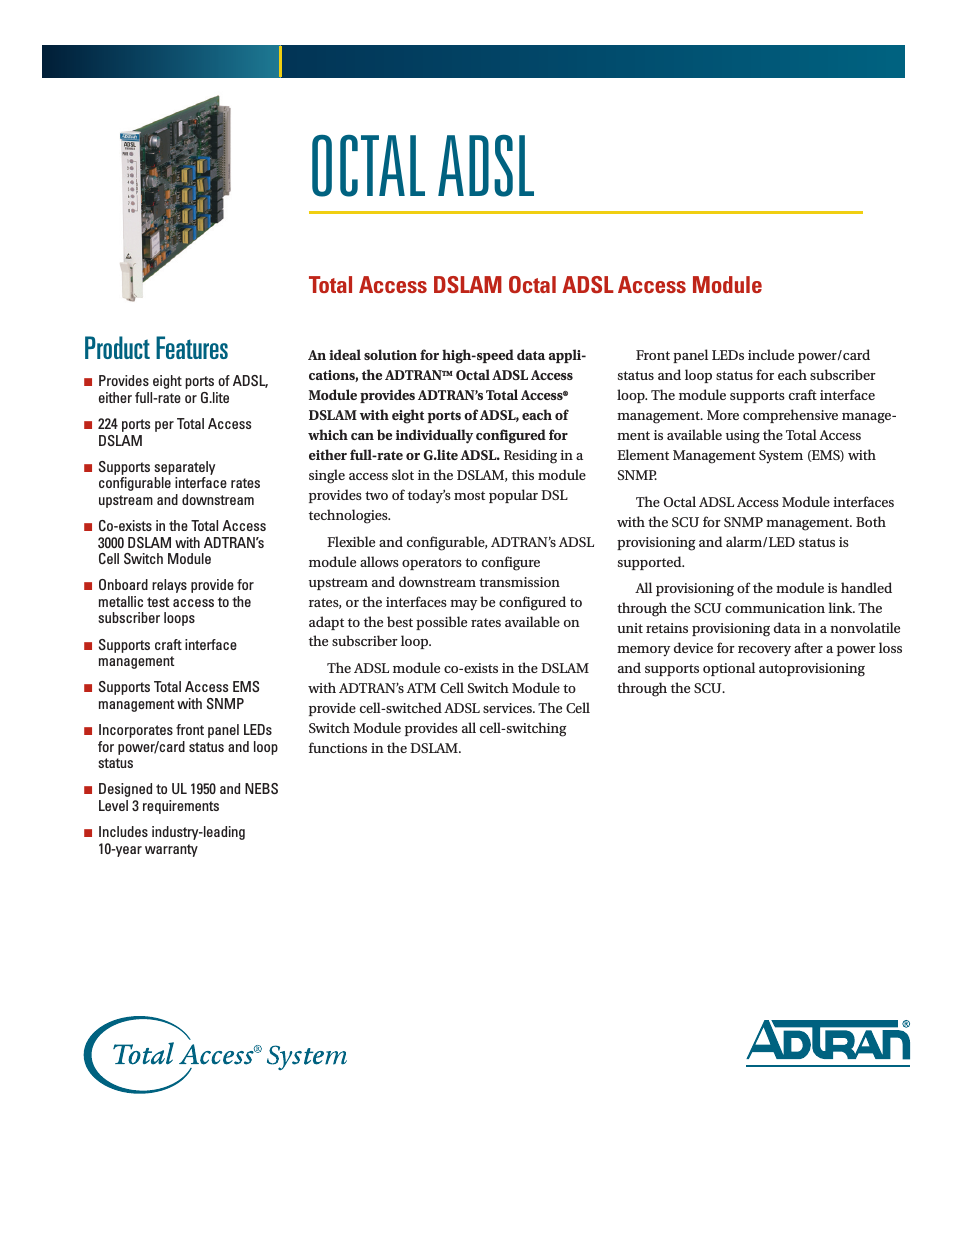 Total Access Octal ADSL